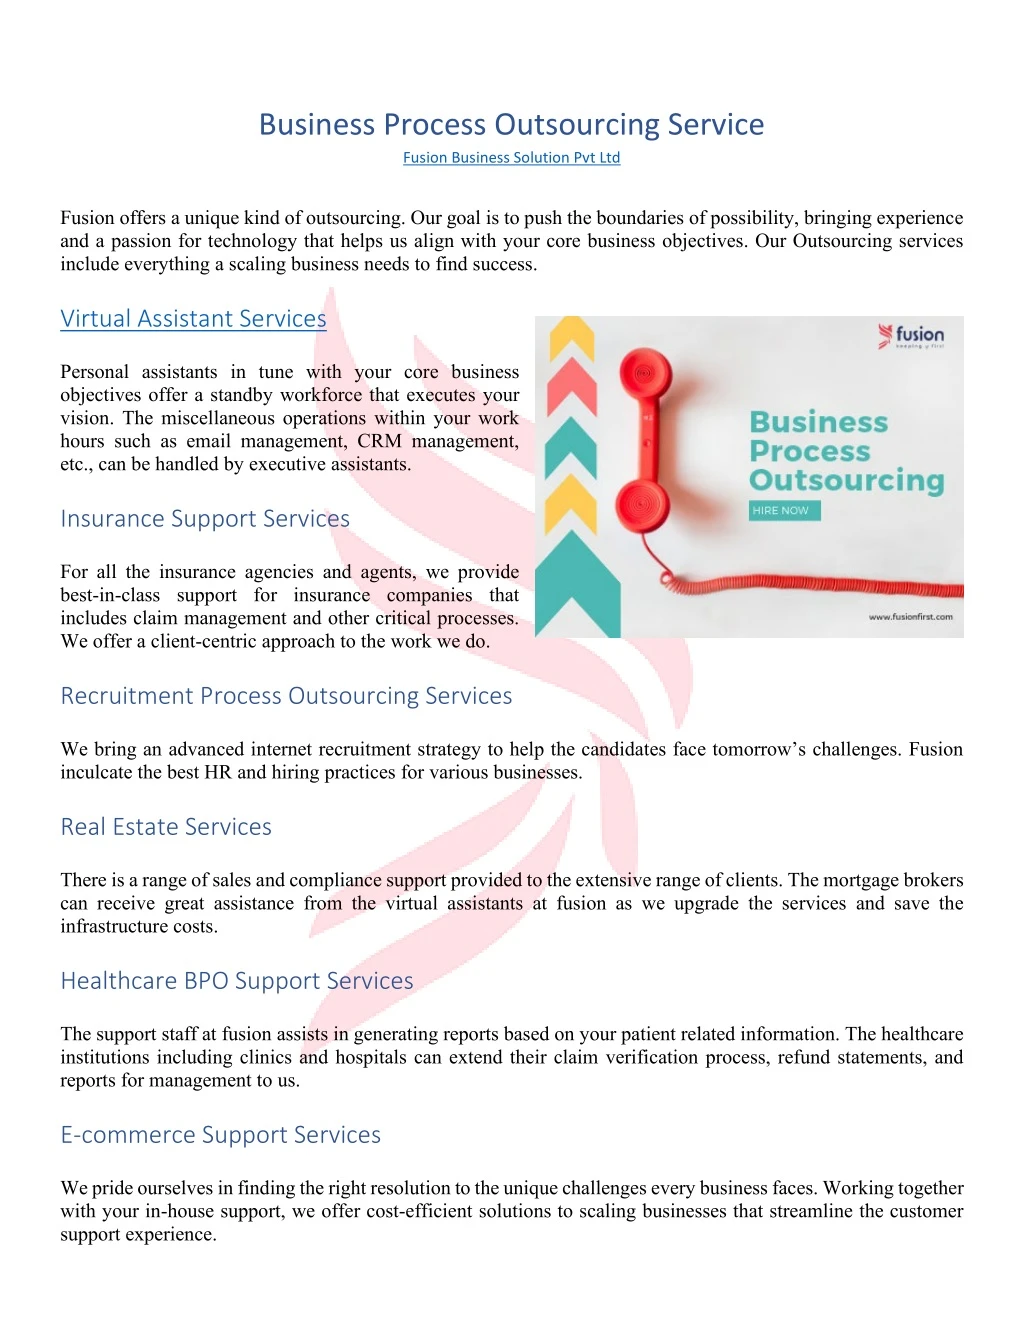 business process outsourcing service fusion